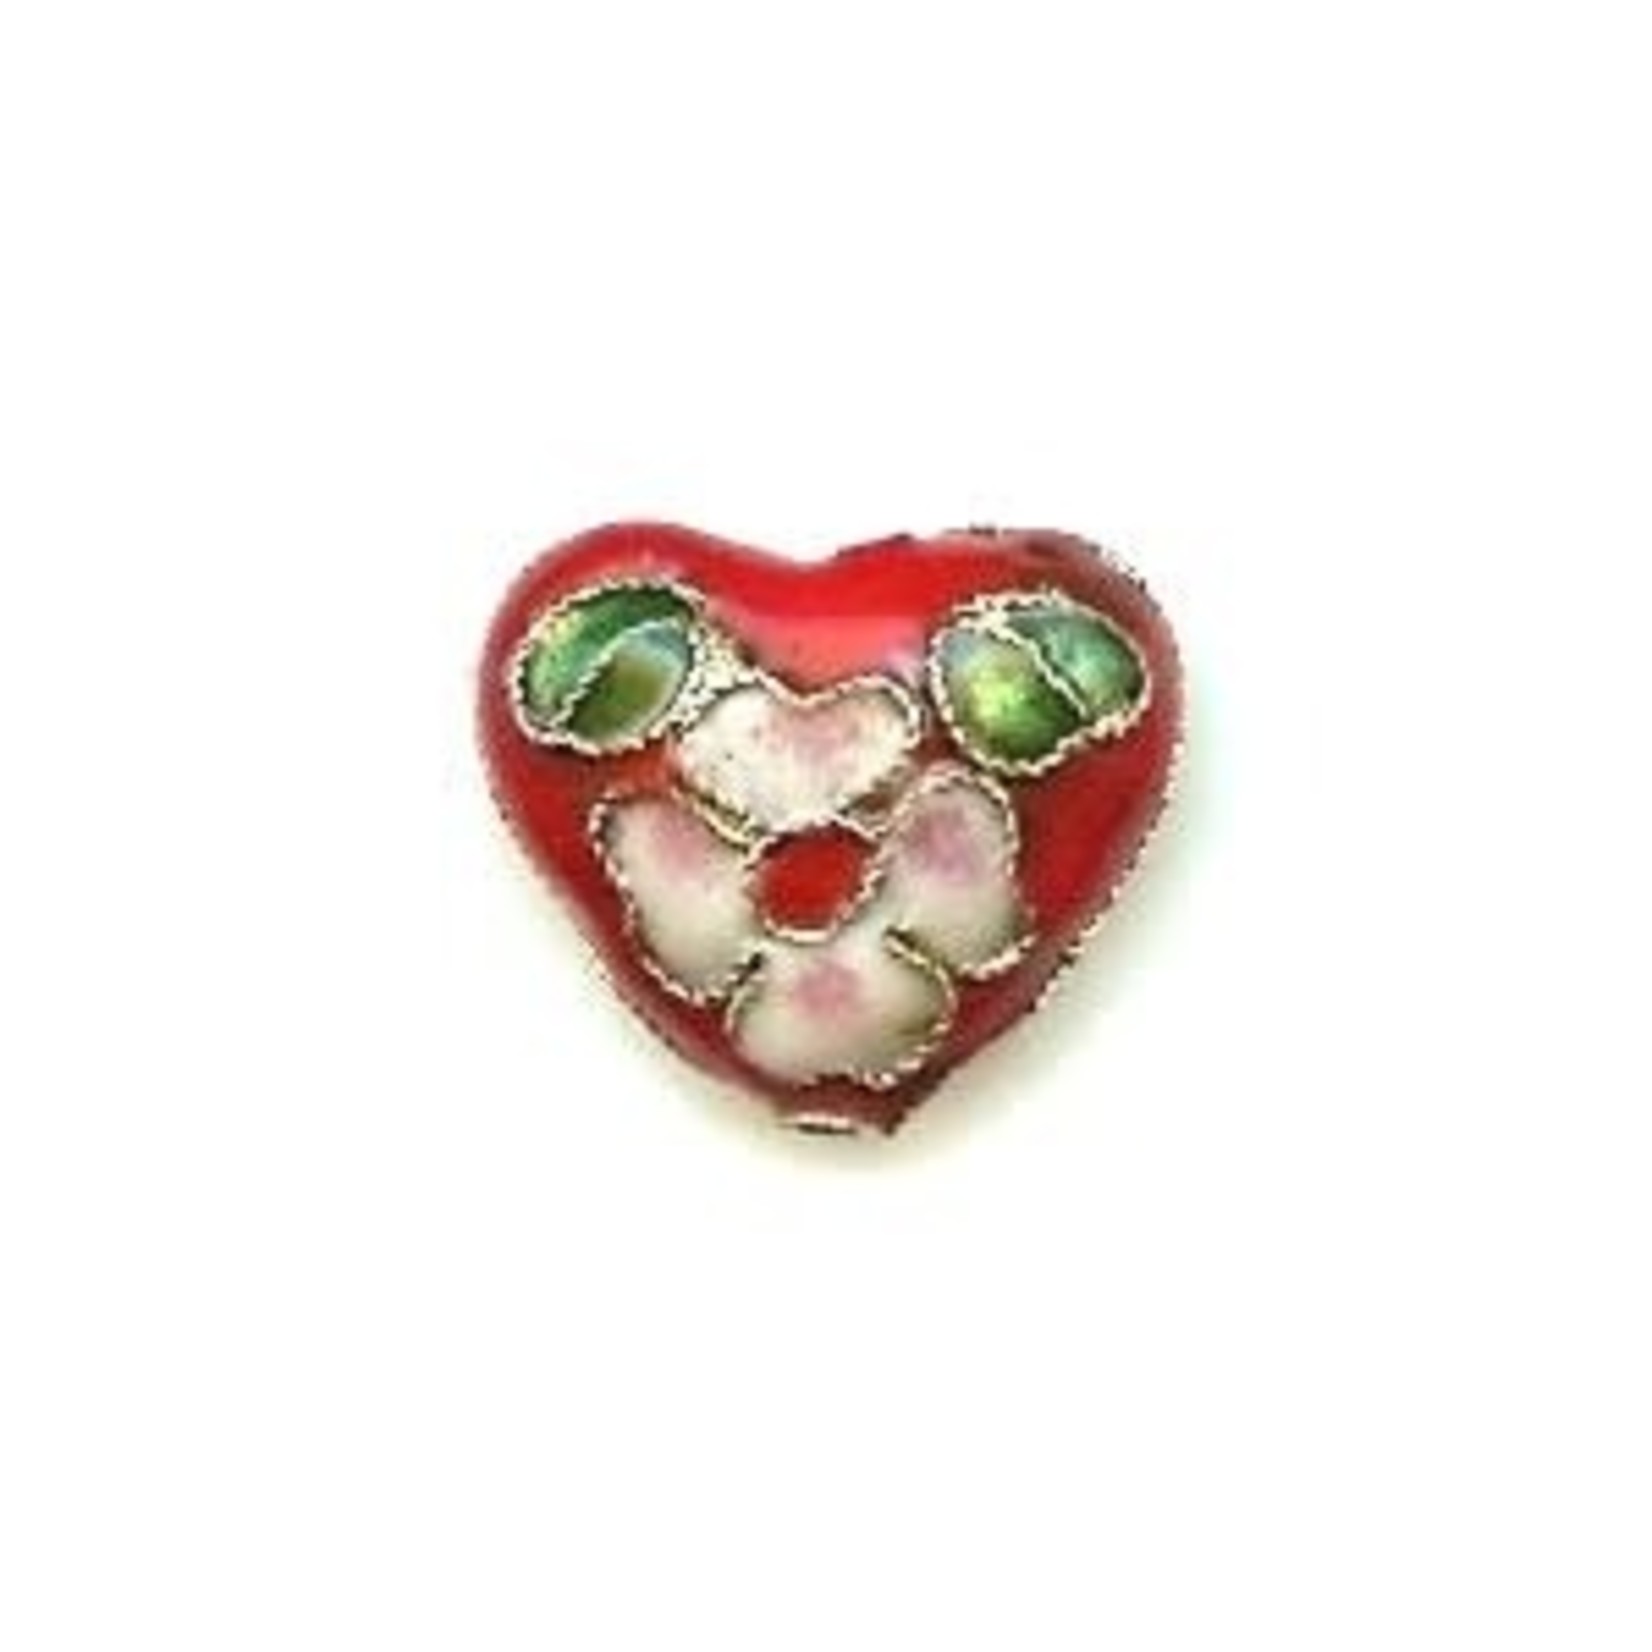 Cloisonne Heart Bead - Red